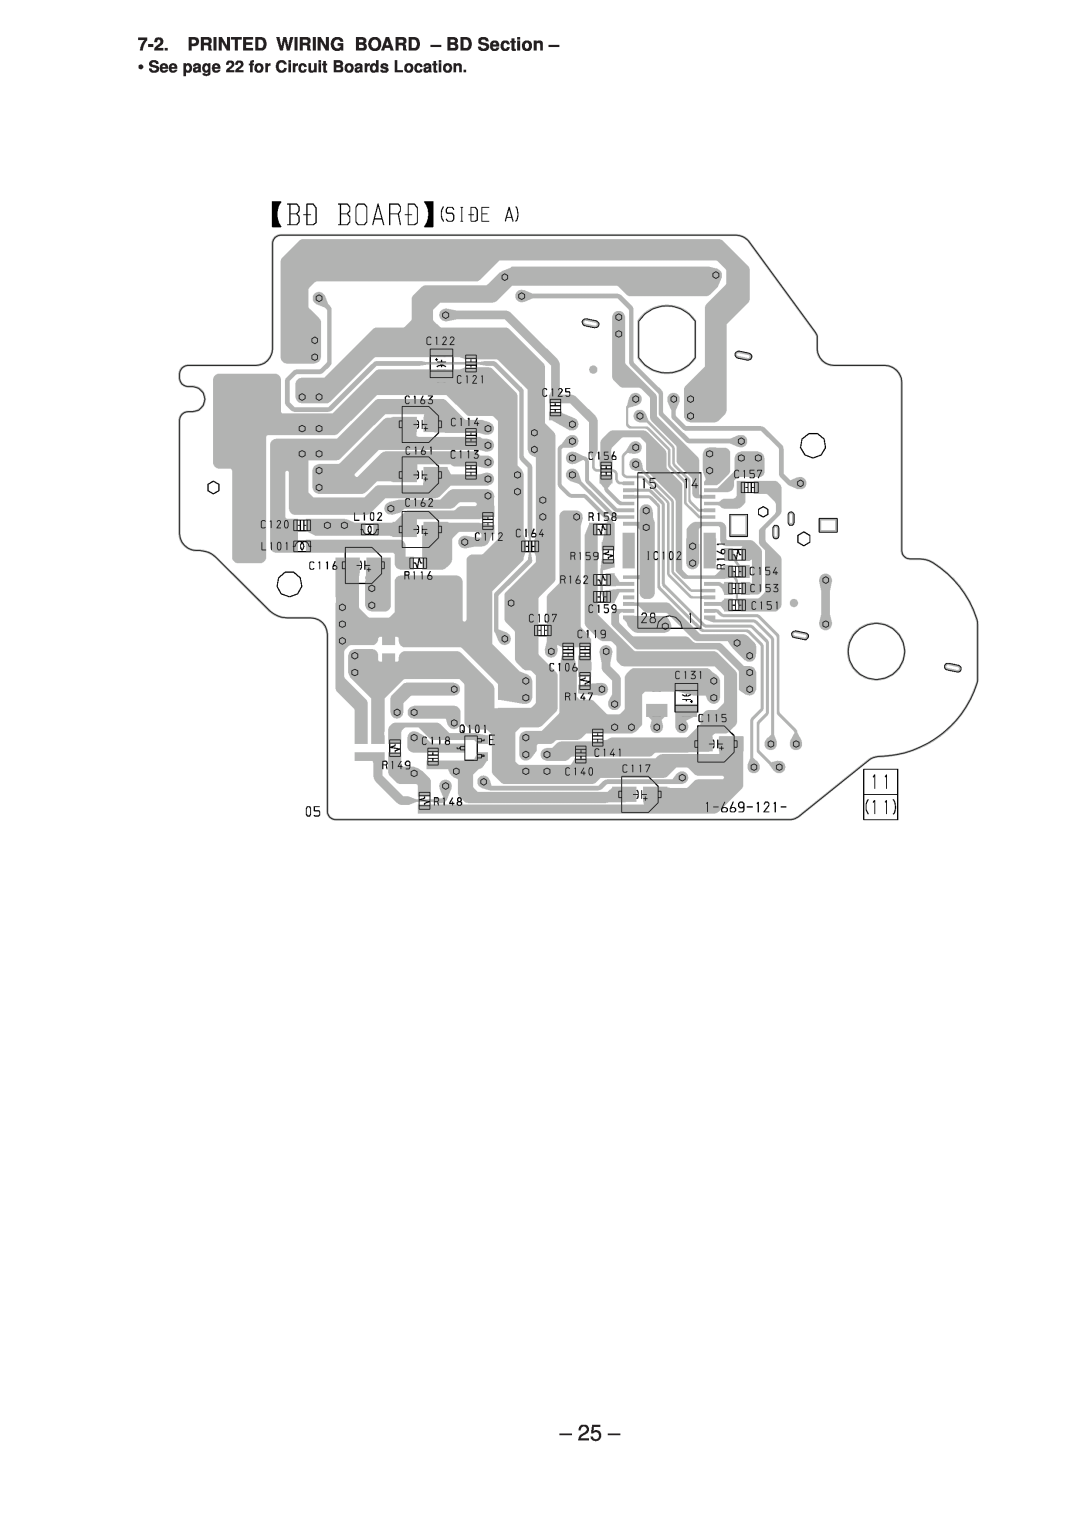 Sony Ericsson CDP-CX220 service manual PRINTED WIRING BOARD - BD Section, See page 22 for Circuit Boards Location 